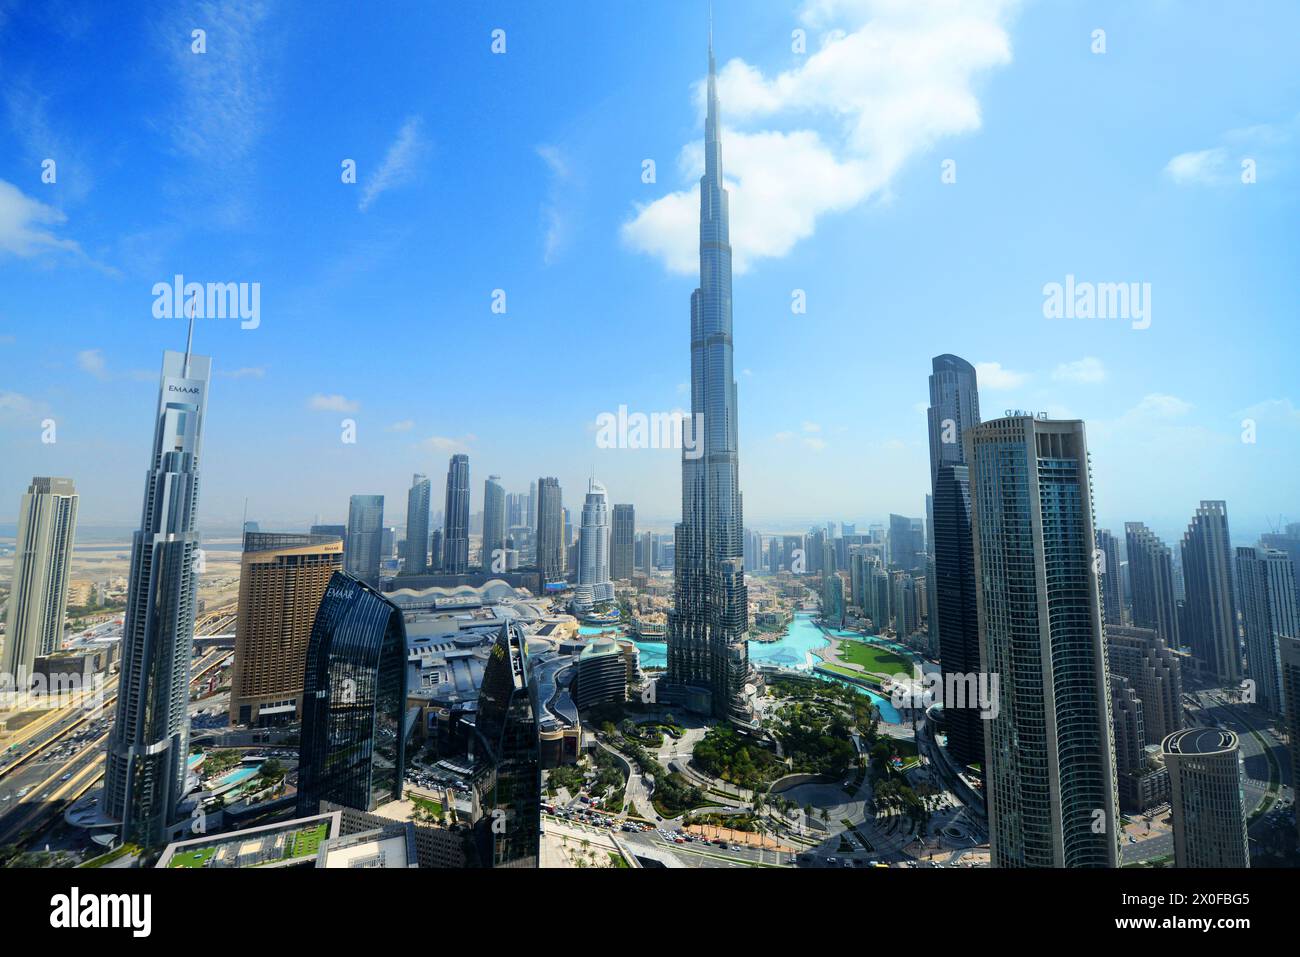 The Burj Khalifa tower with the Dubai Mall and other skyscrapers around it in Dubai, UAE. Stock Photo